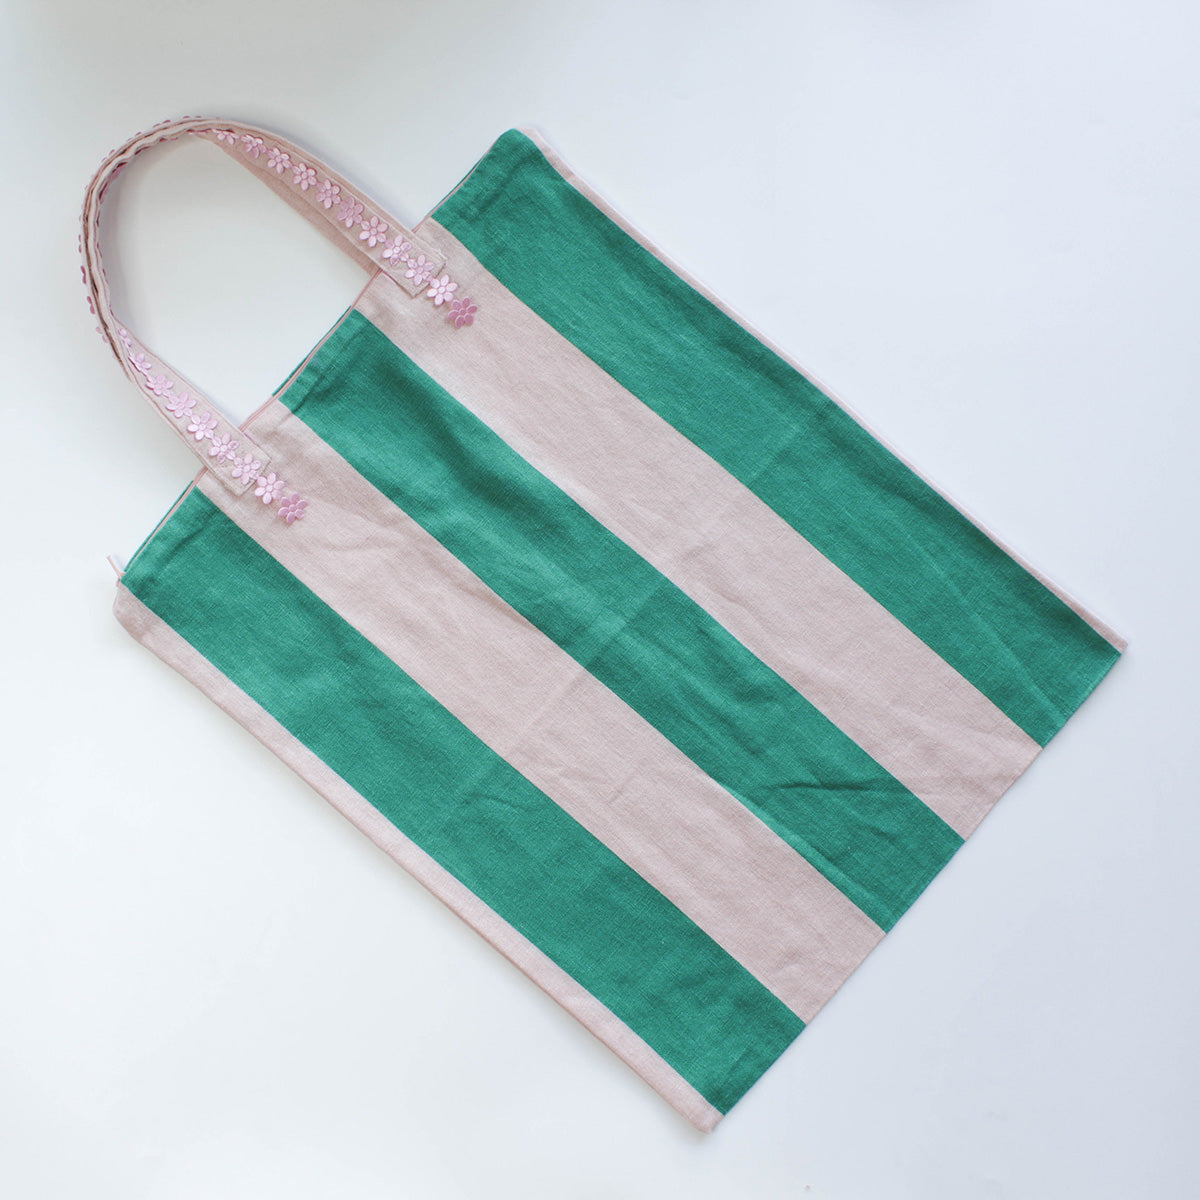 Green and pink Tote bag